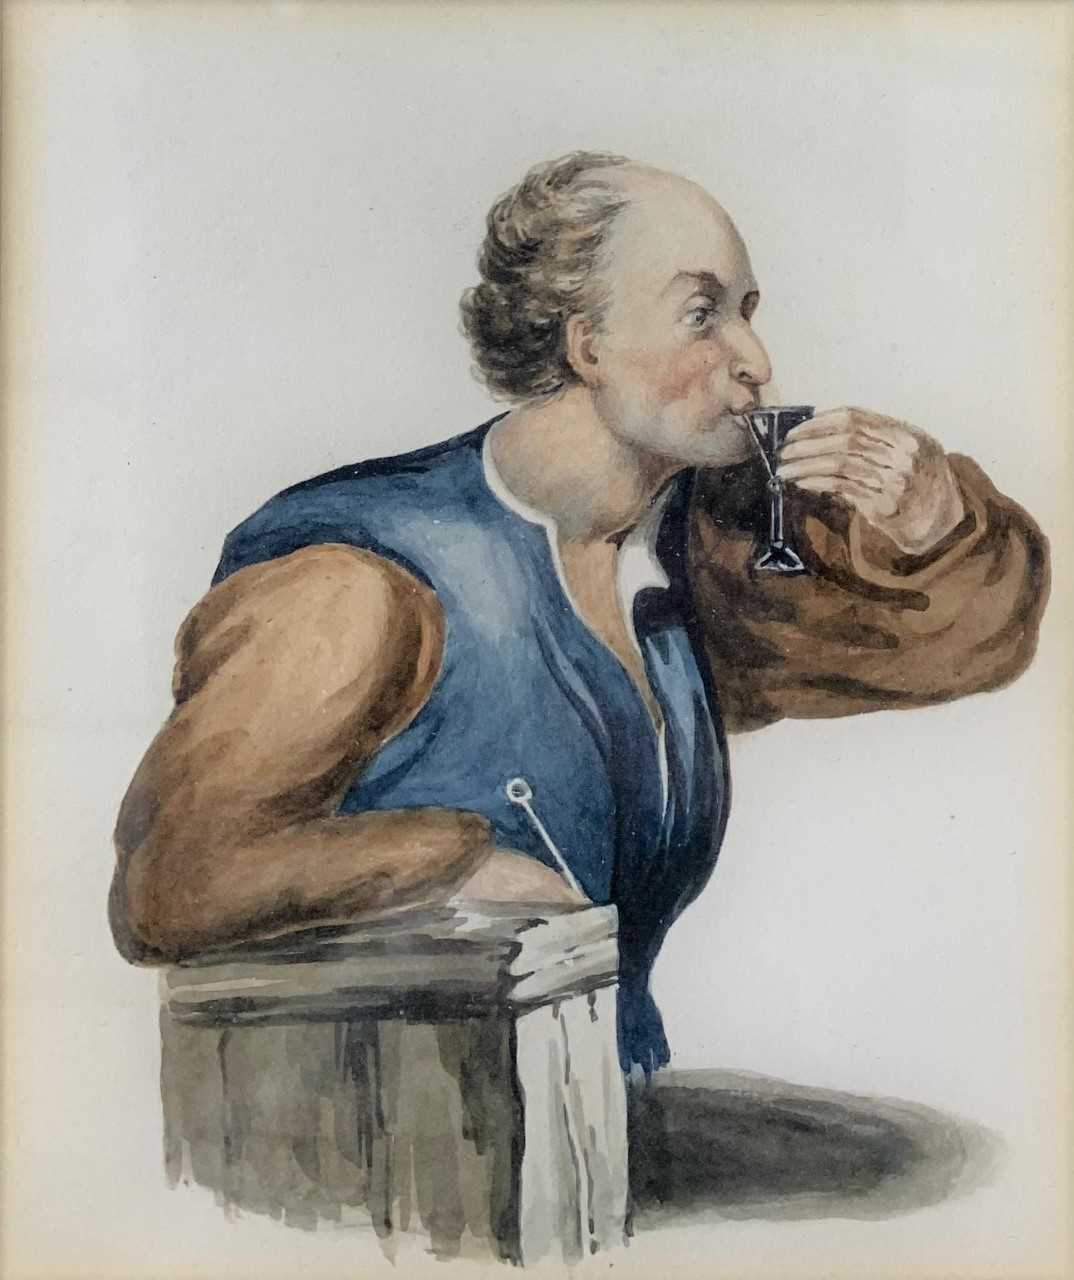 Attributed to W.C. Callotter (circa 1853), 19th century watercolour, 3.5x4ins, framed and glazed.